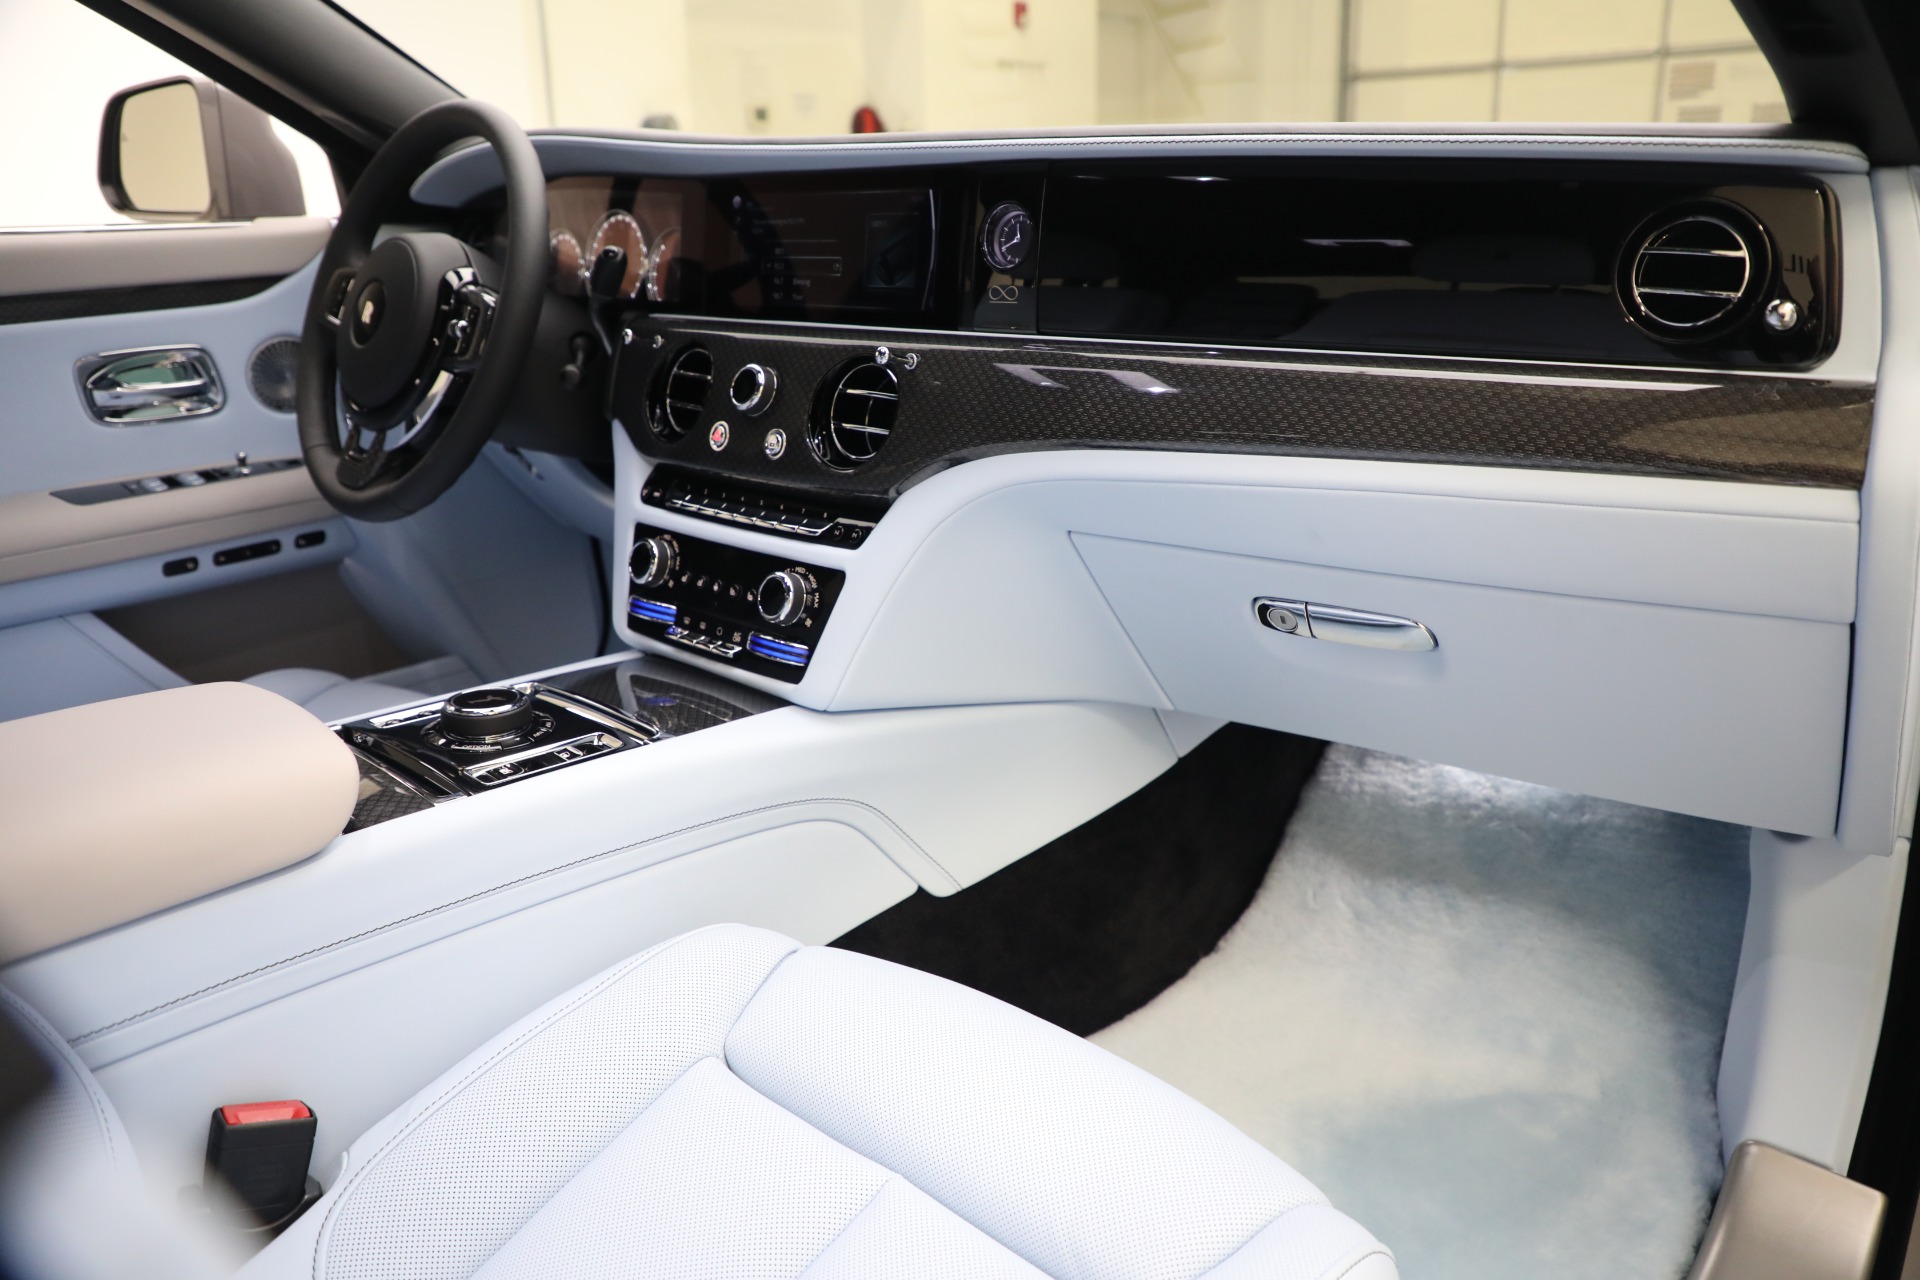 THE NEW ROLLS-ROYCE GHOST INTERIOR